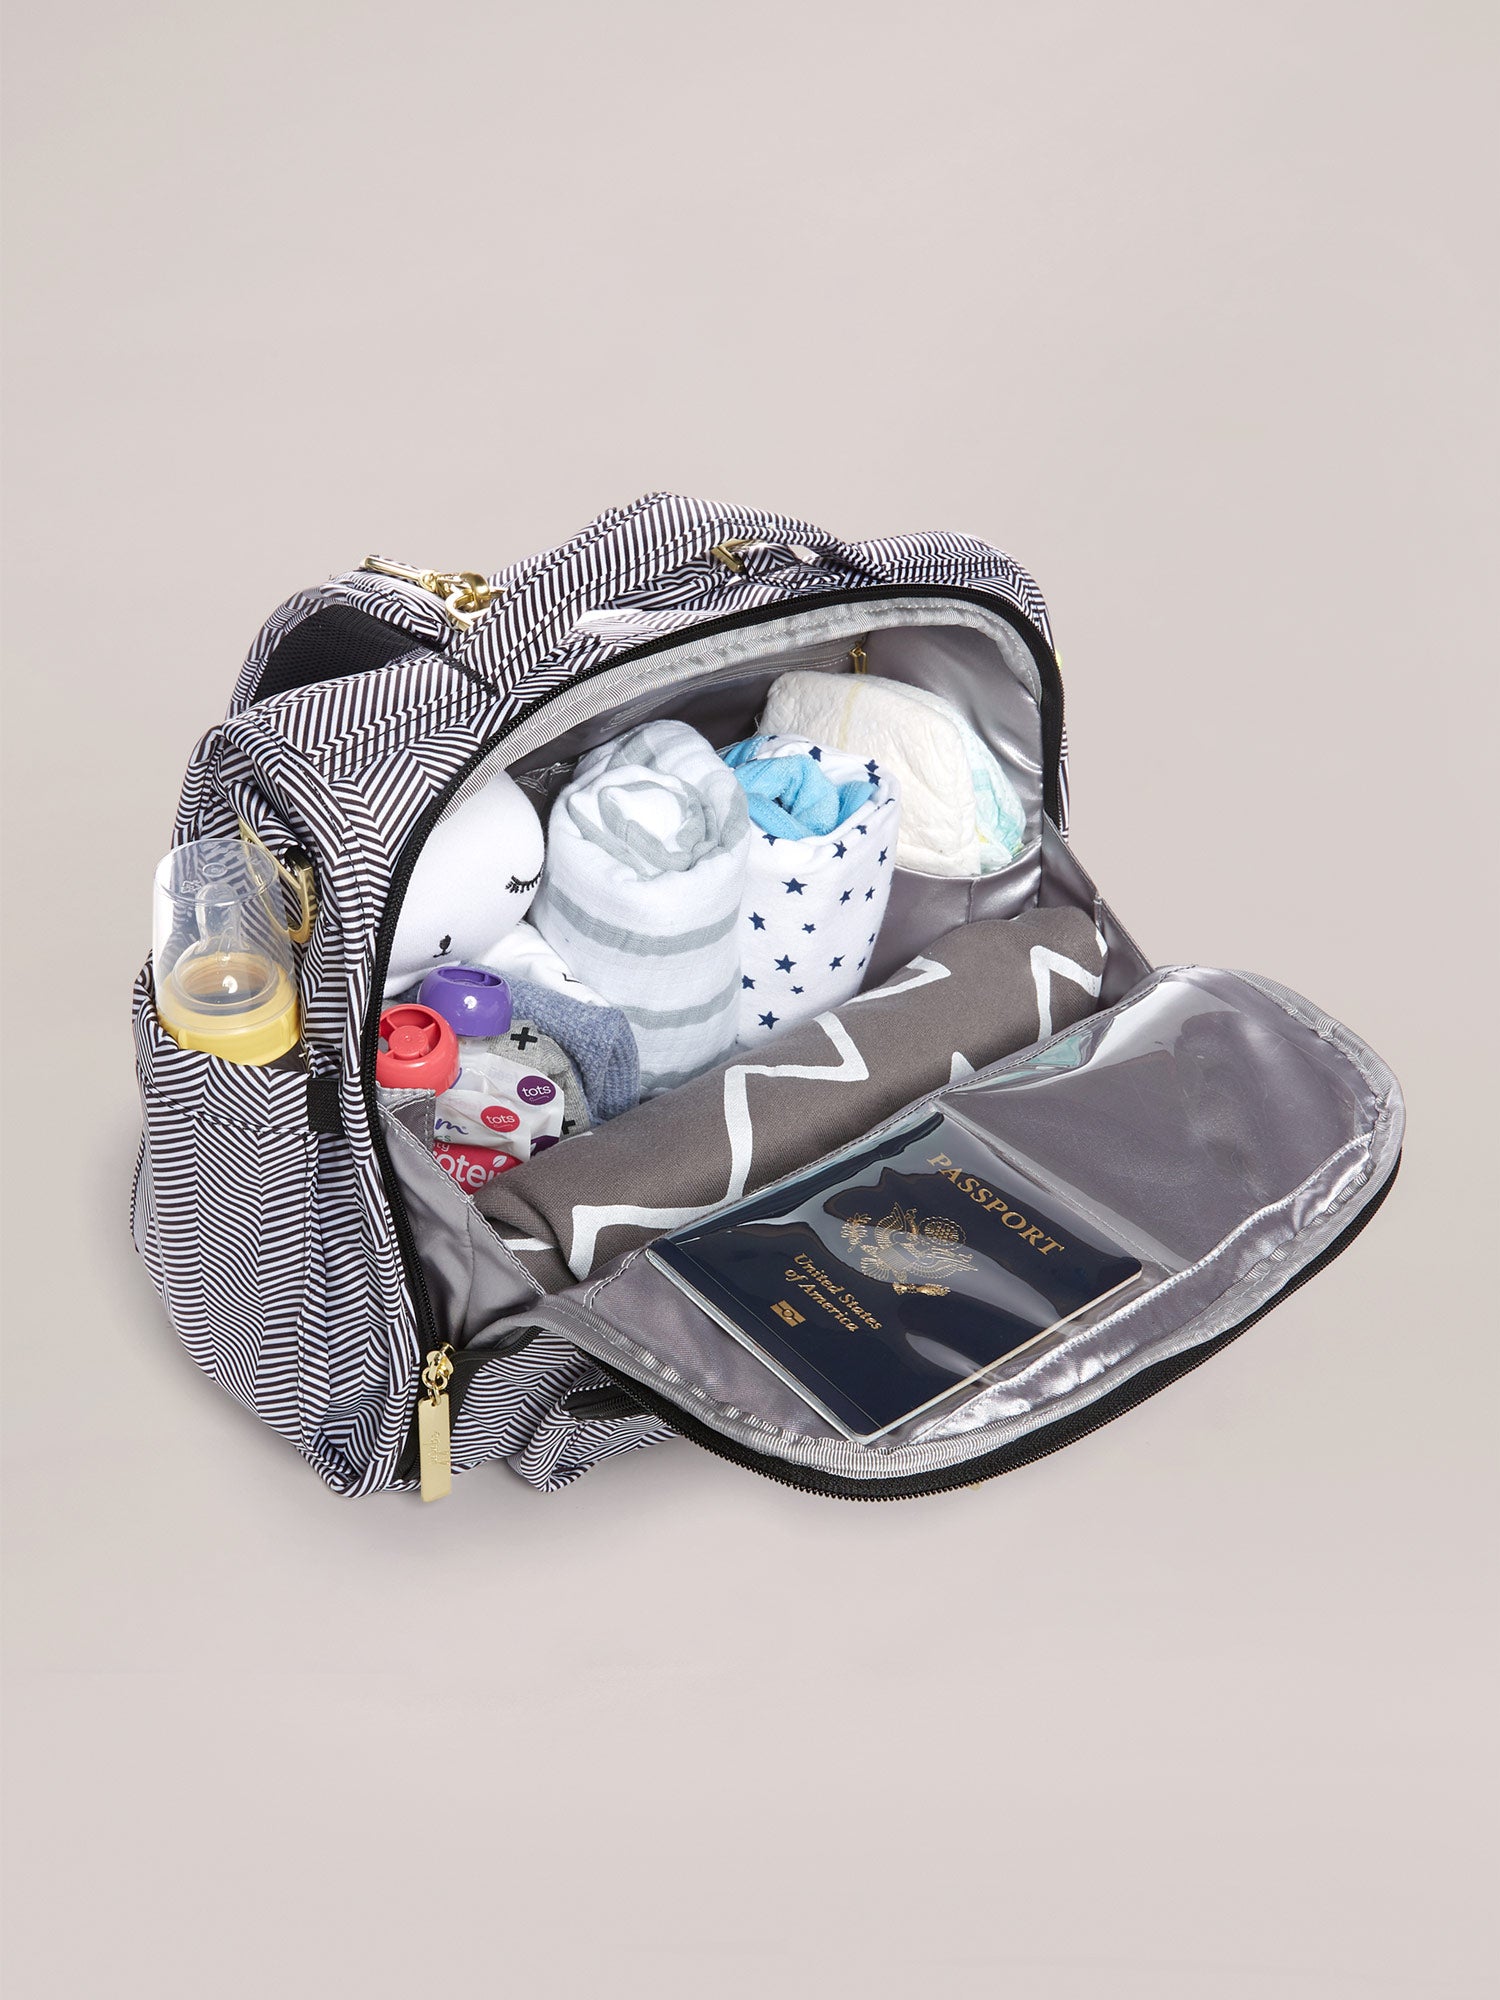 B.F.F. Diaper Bag - Queen of the Nile